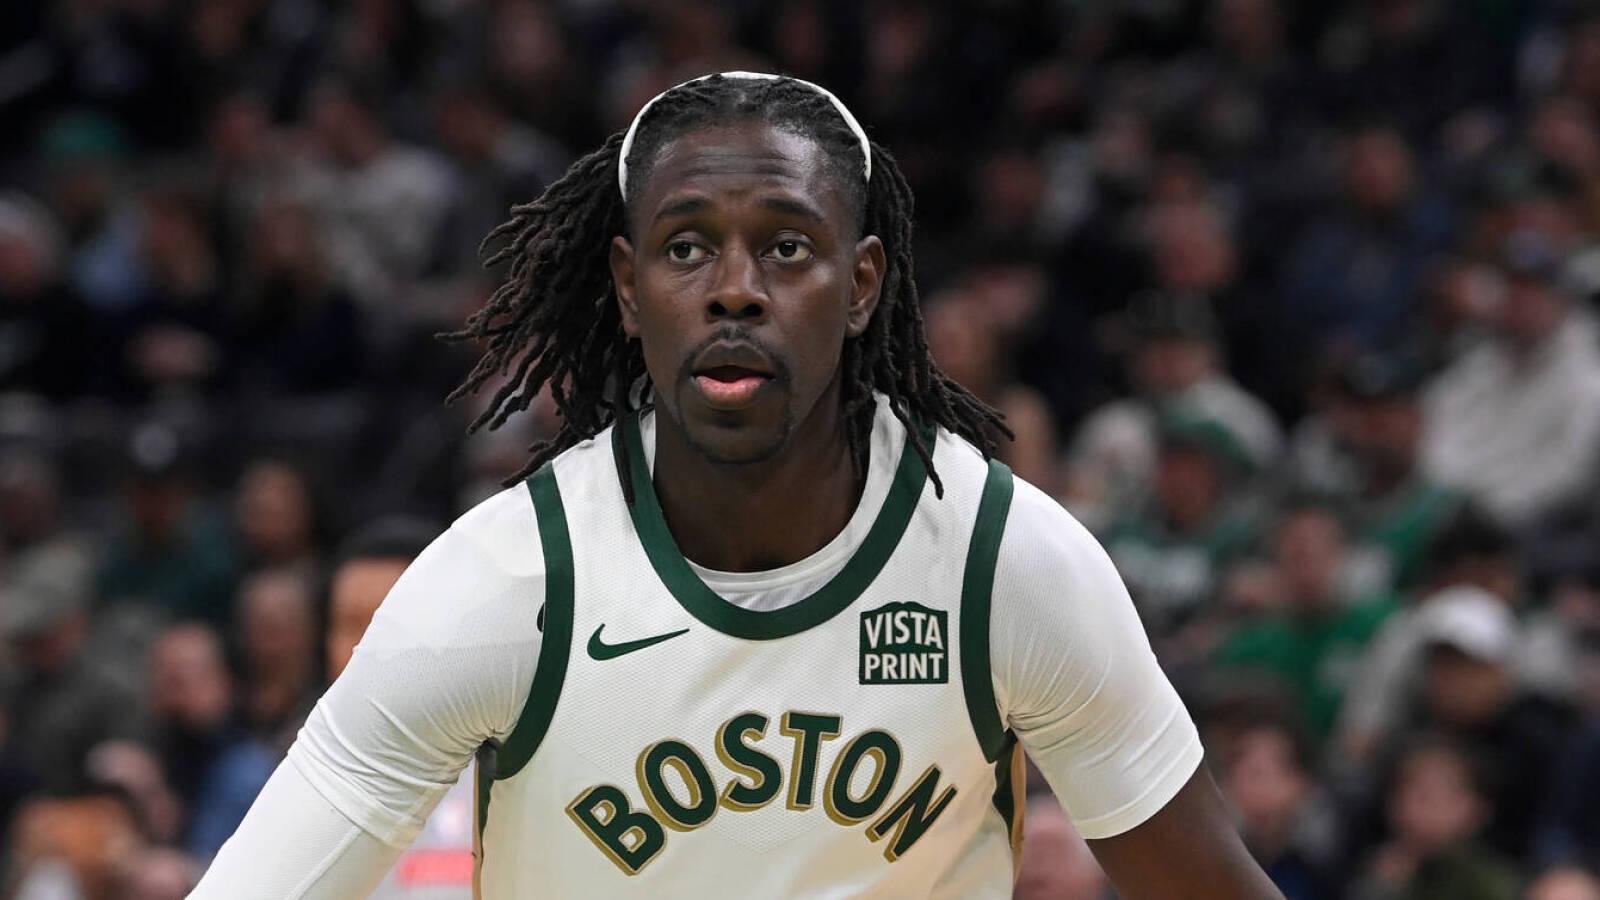 Jrue Holiday's contract extension creates more questions than answers for the Celtics